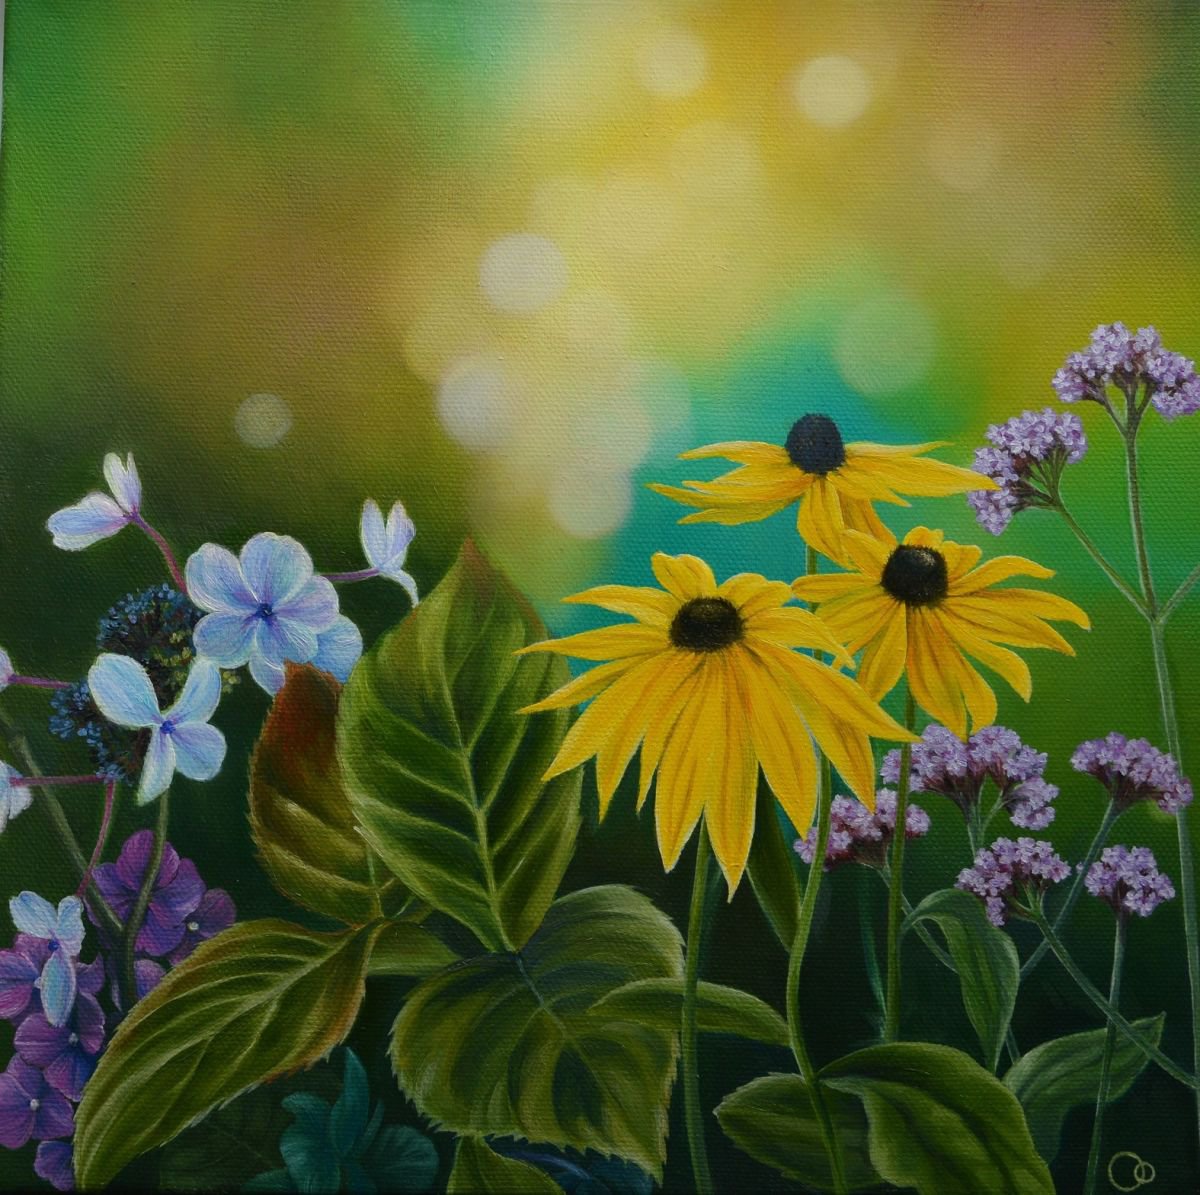 Late Summer Blooms - oil on canvas floral art by Veronique Oodian